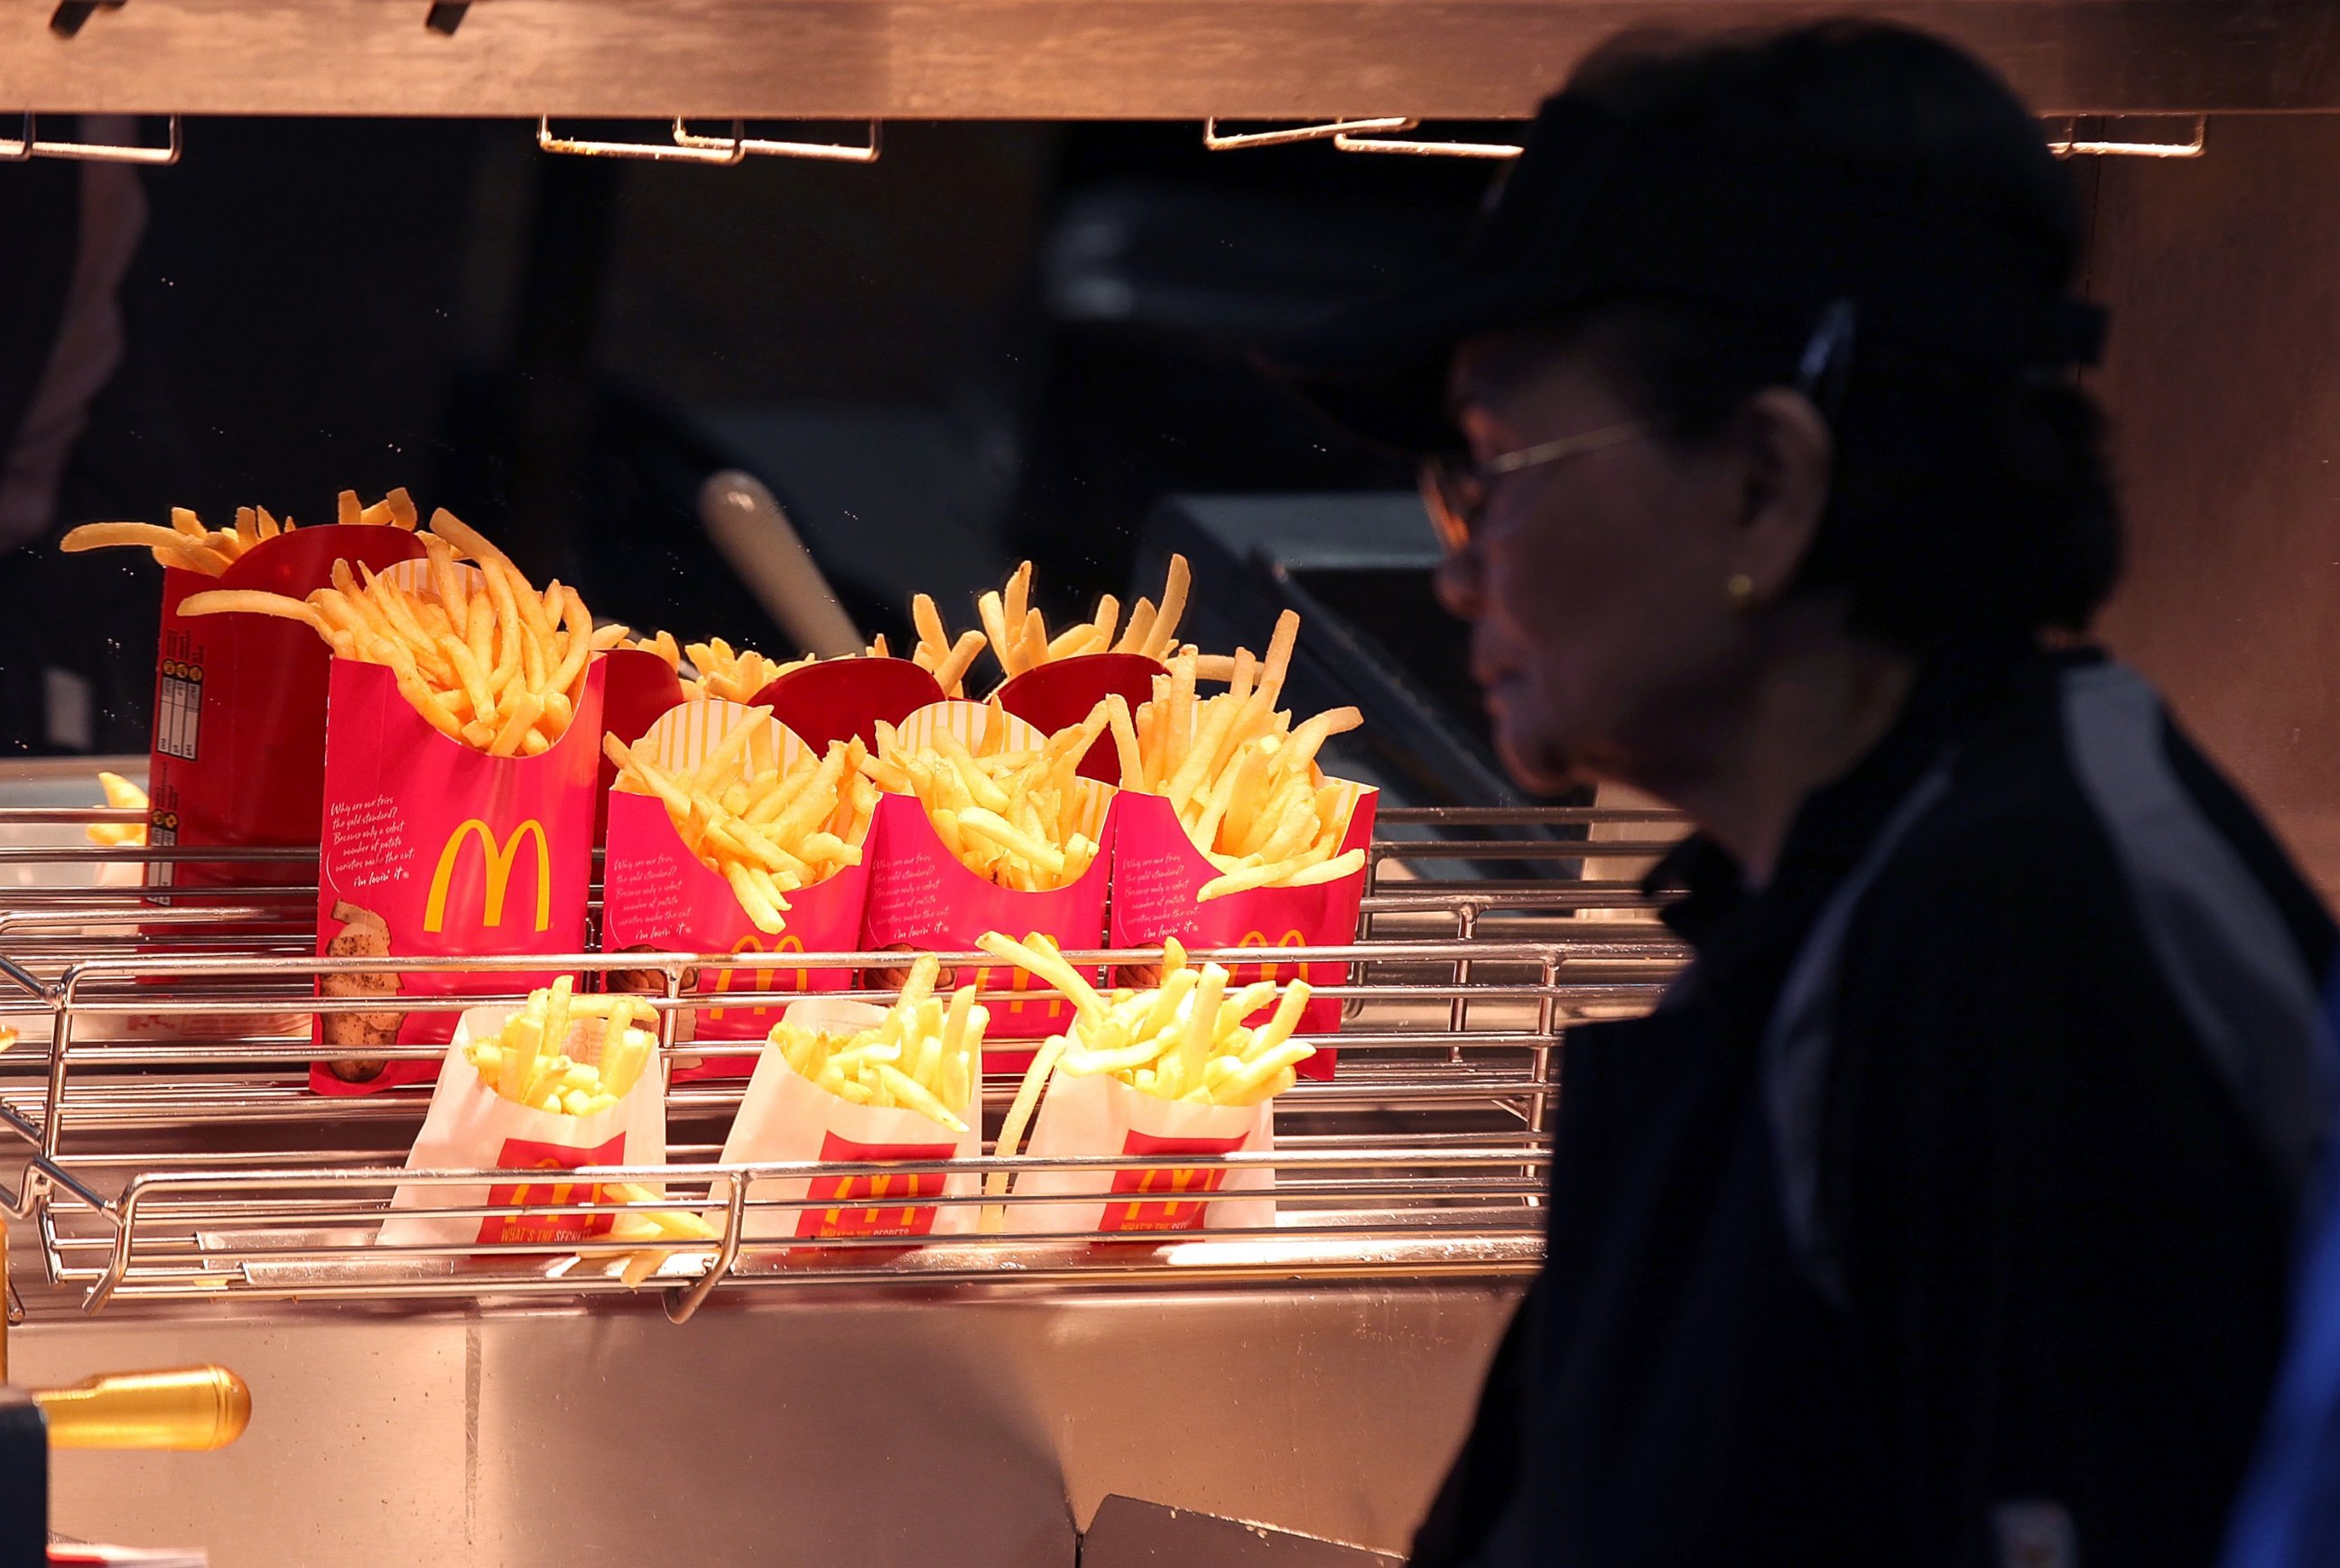 PHOTO: In this April 19, 2011 file image, McDonald's french fries sit under a heat lamp during a one-day hiring event at a McDonald's restaurant in San Francisco.